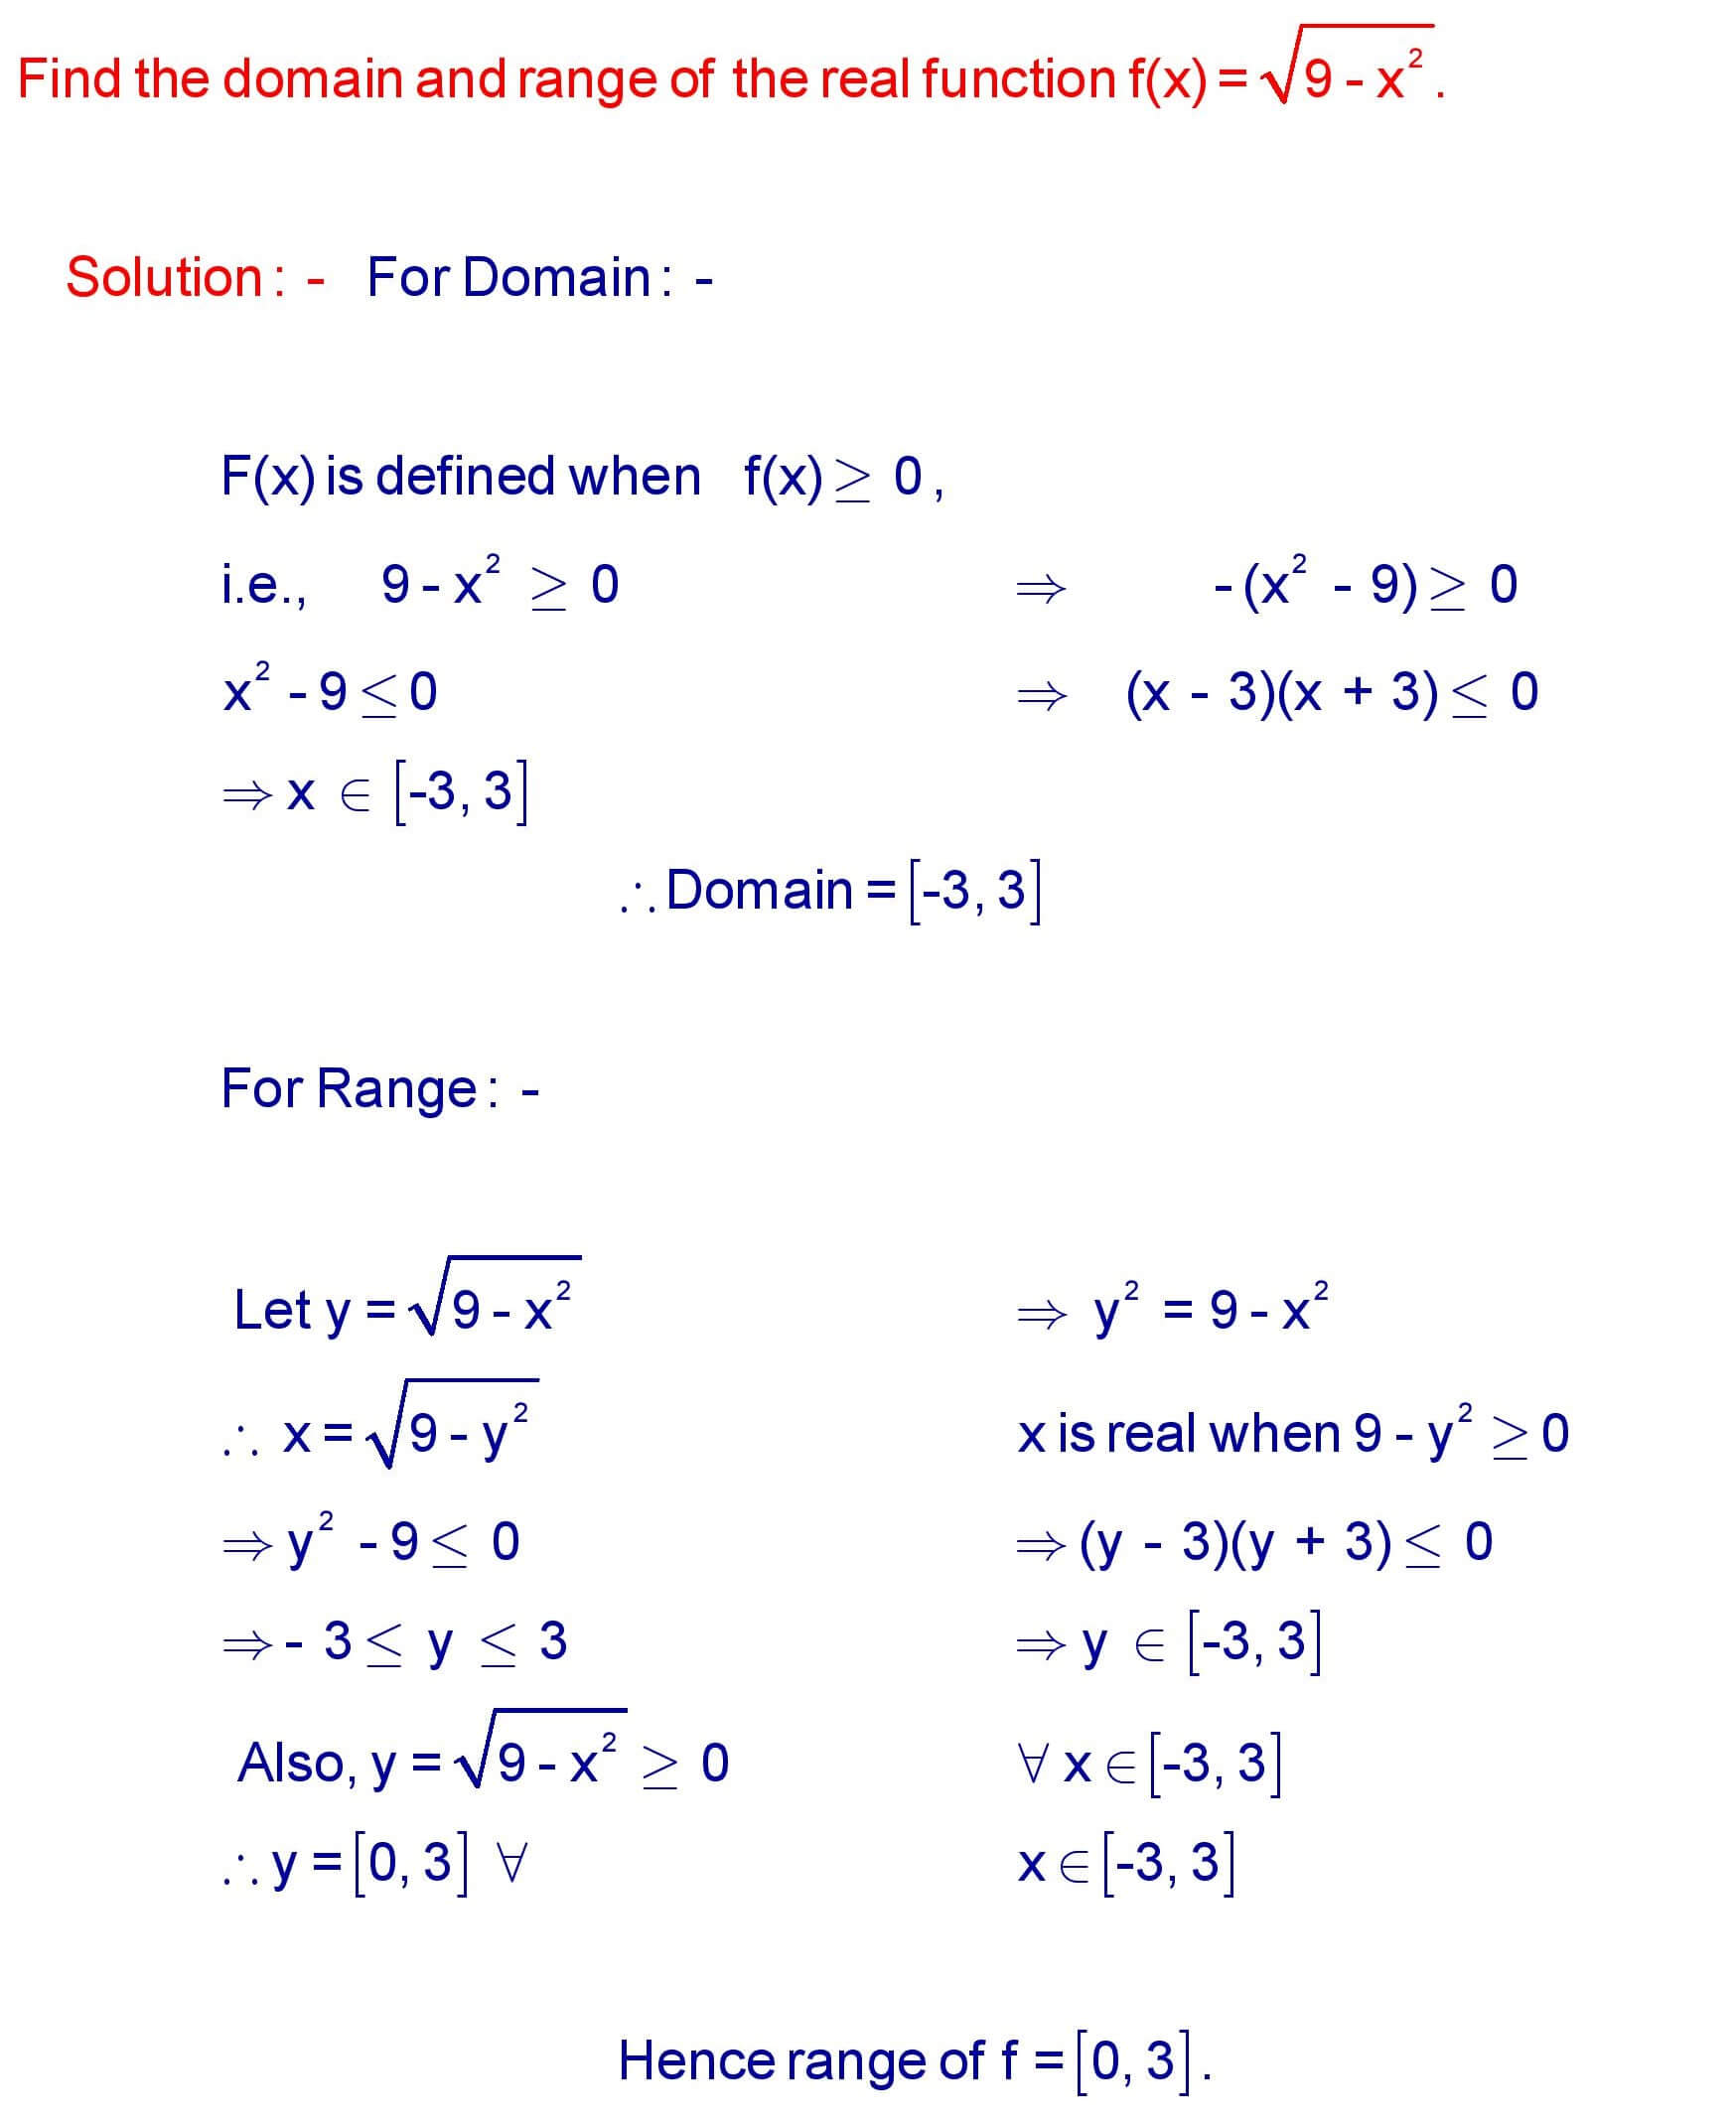 Working Rule to find the Domain and Range of a Function